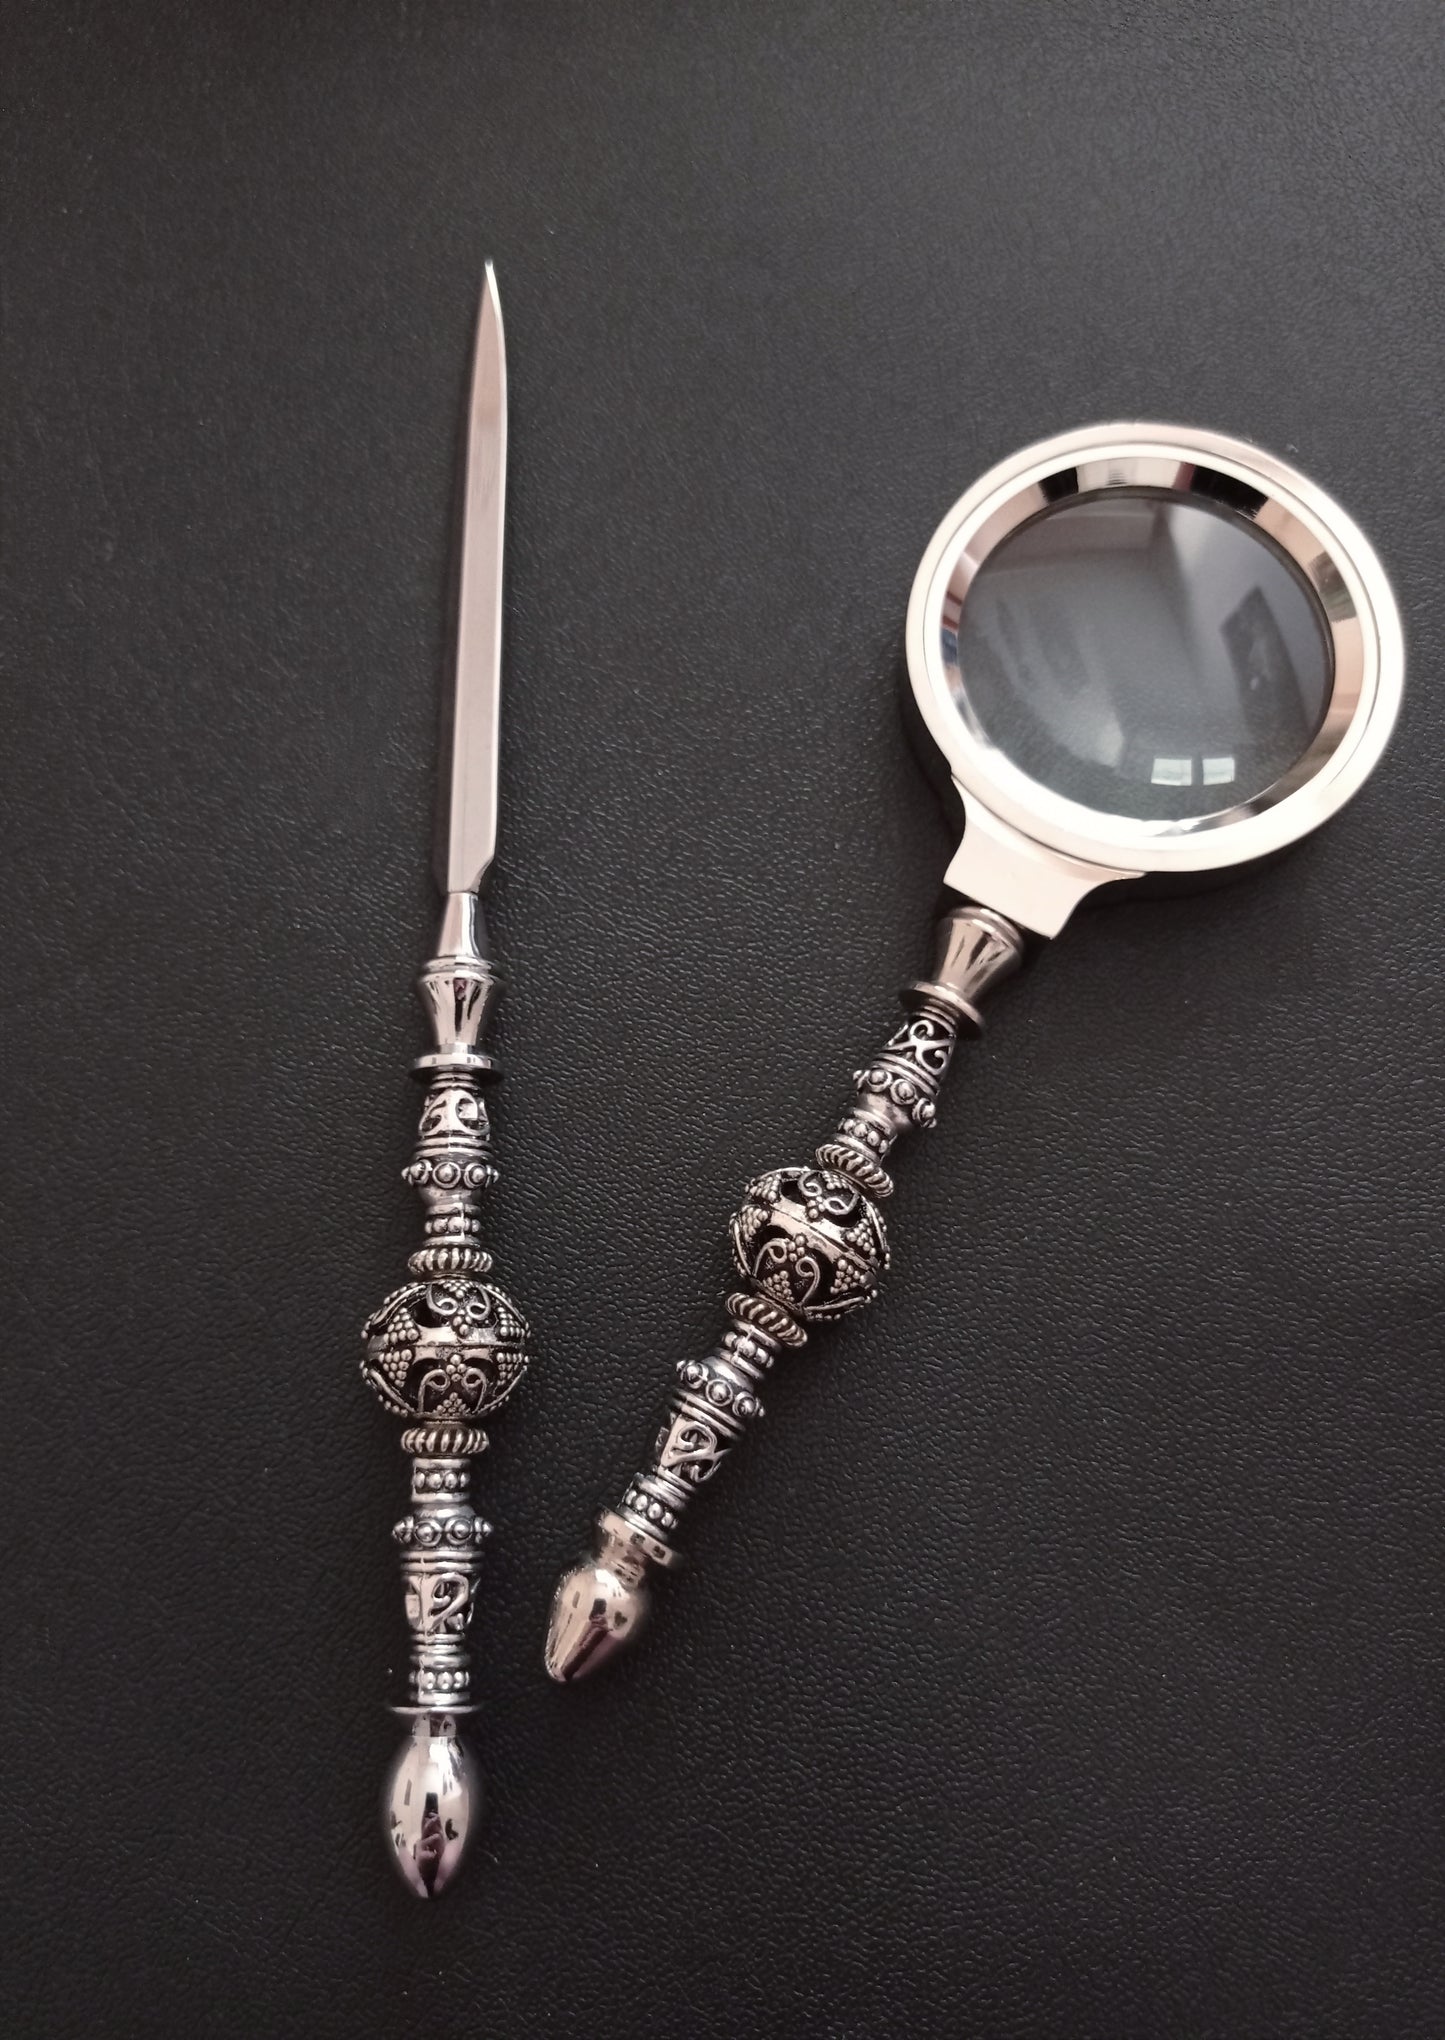 Silver Magnifying glass and letter opener set